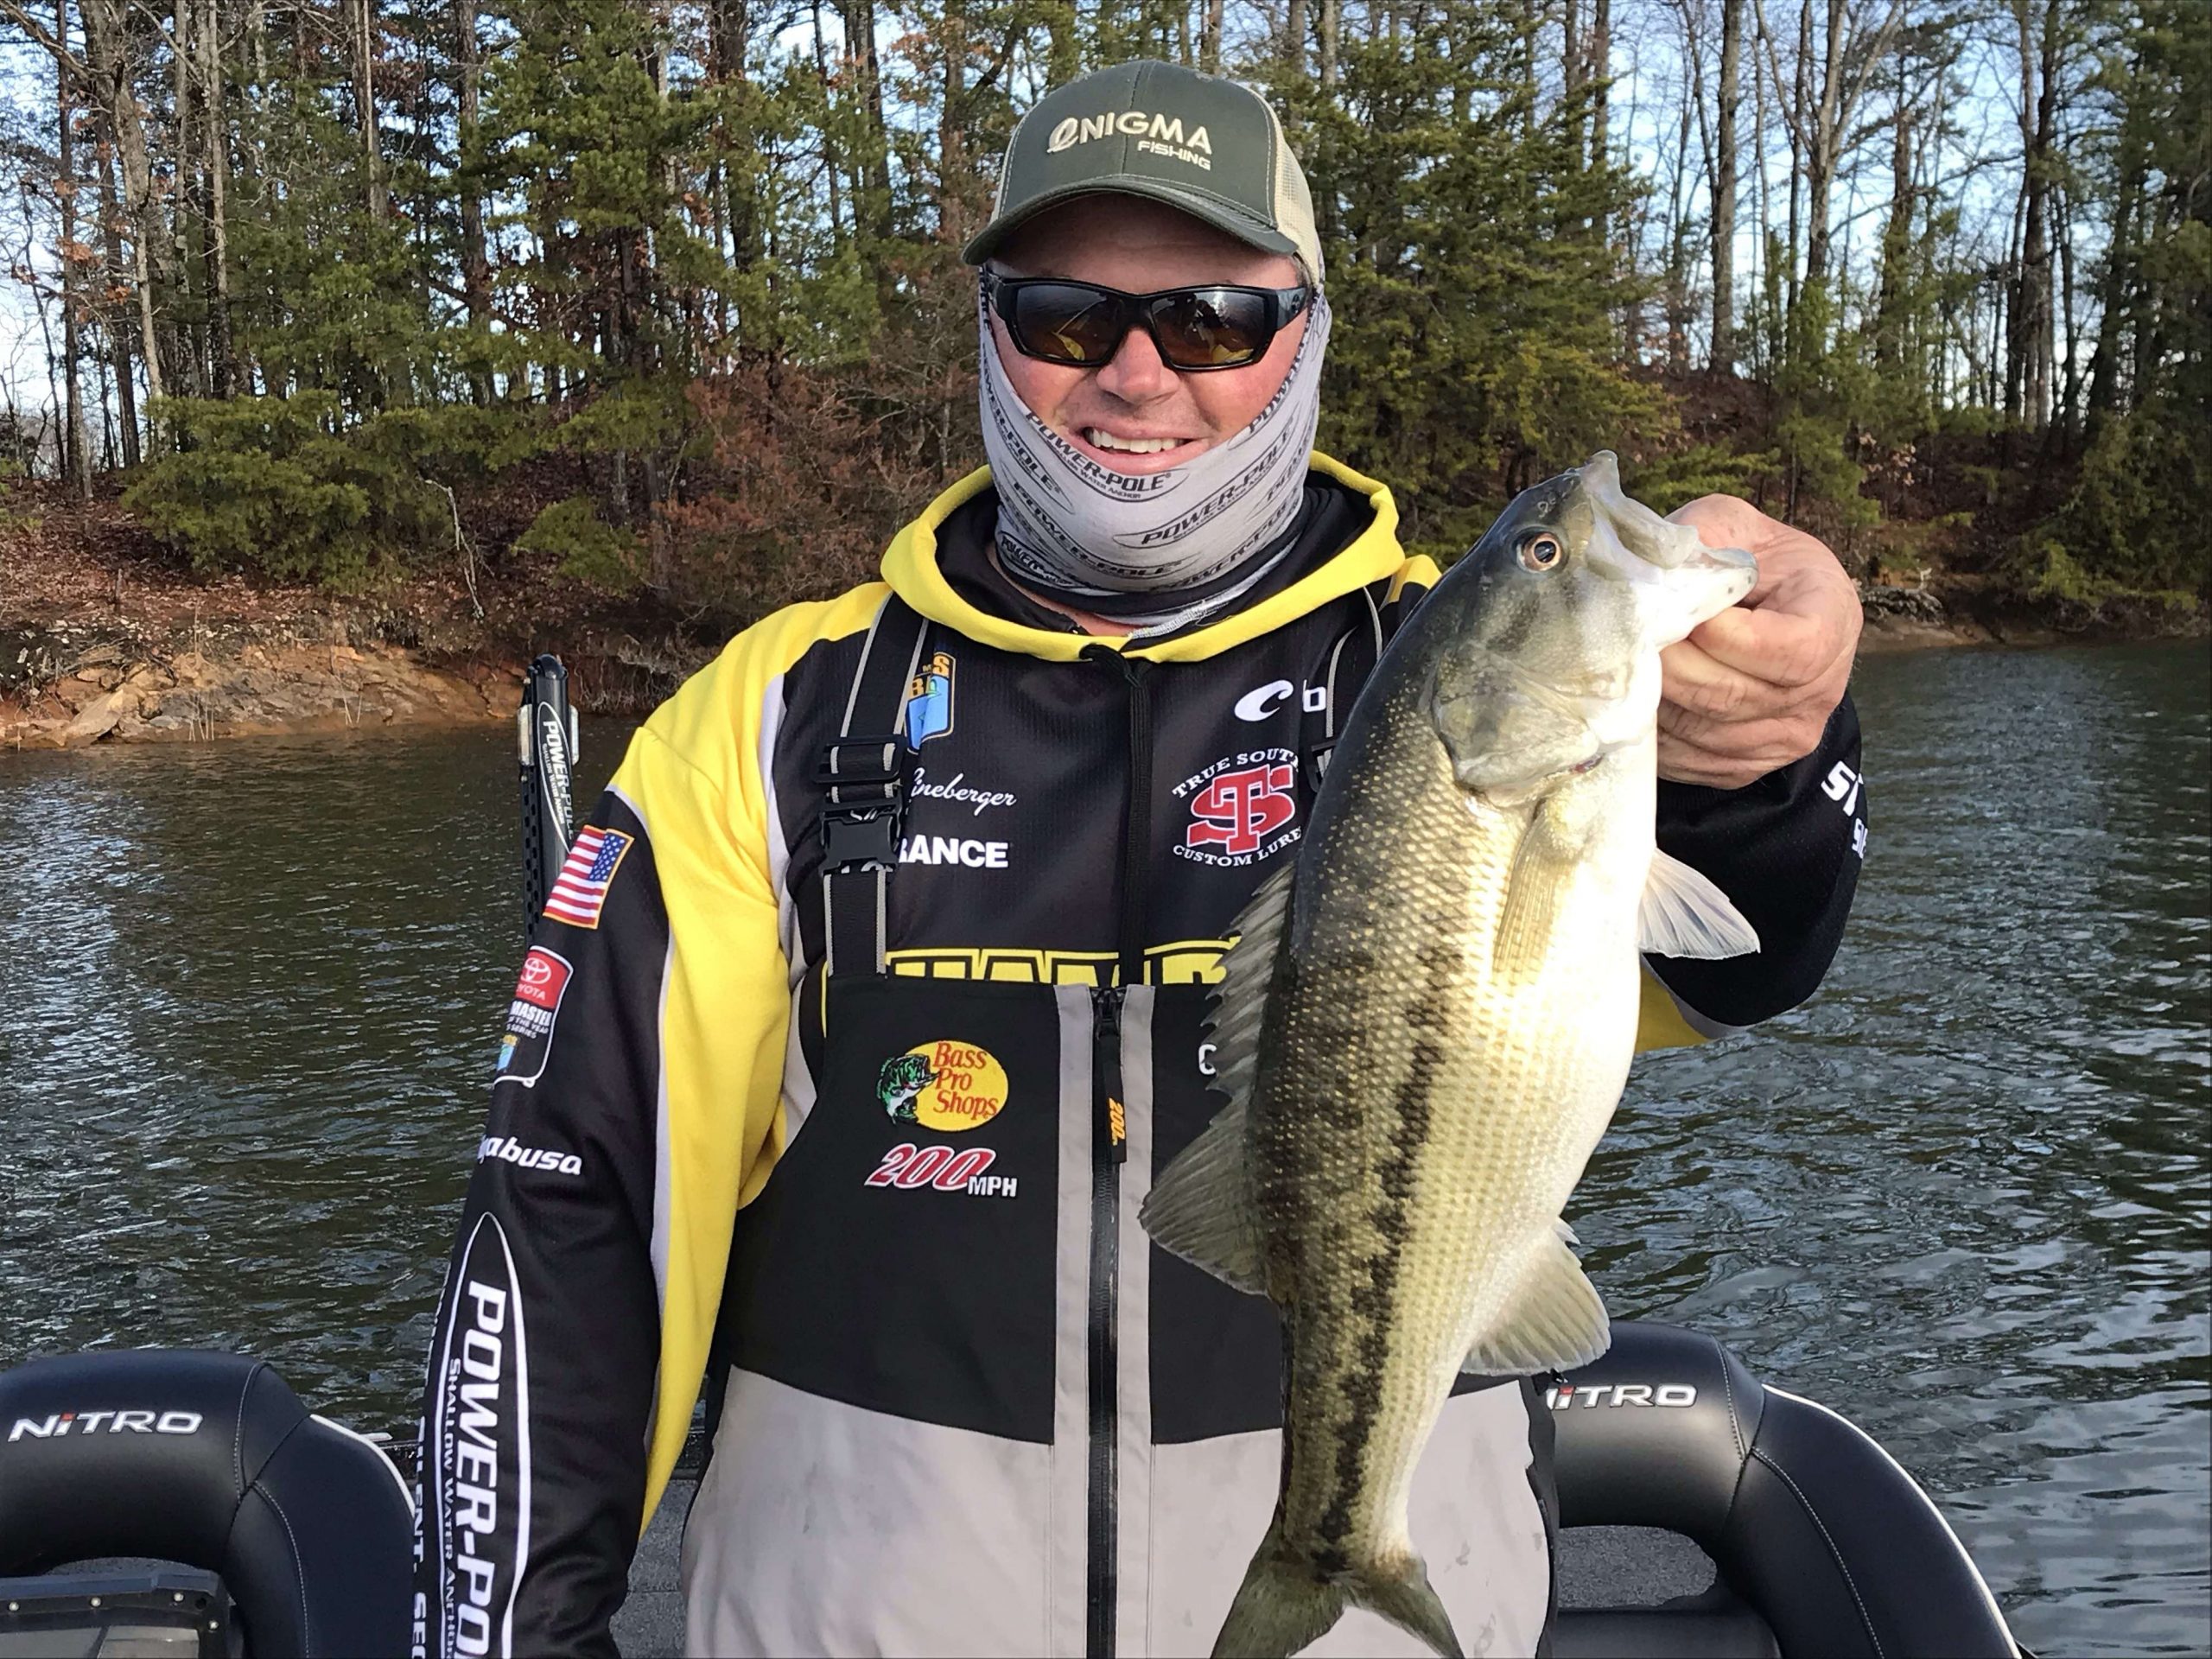 Shane Lineburger just took the slack out of his morning in a hurry! Heâd gotten a bite at this spot yesterday, and came back today - his reward - a 4-pound panda!